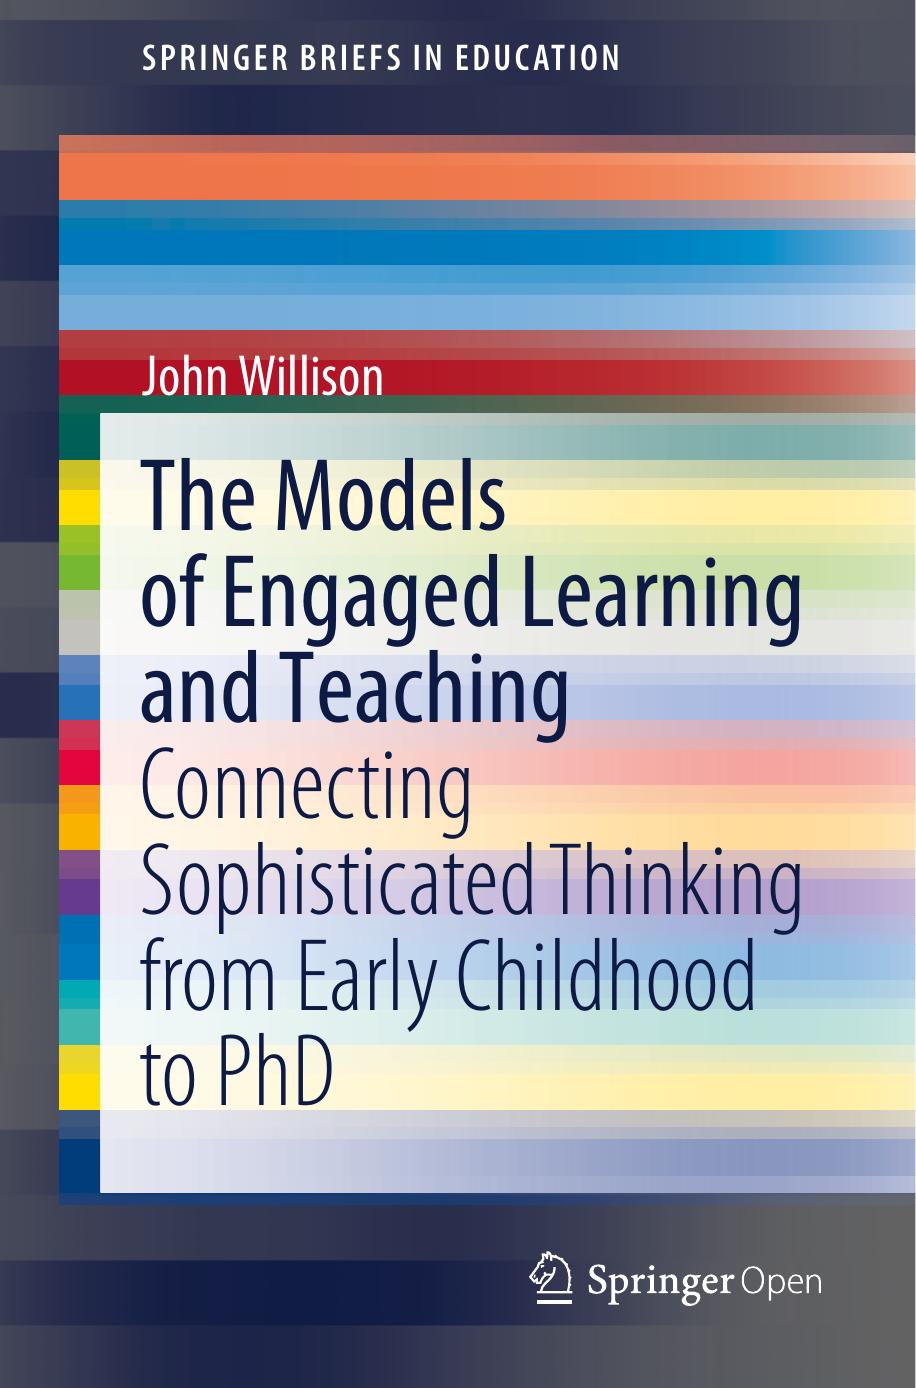 The Models of Engaged Learning and Teaching by John Willison